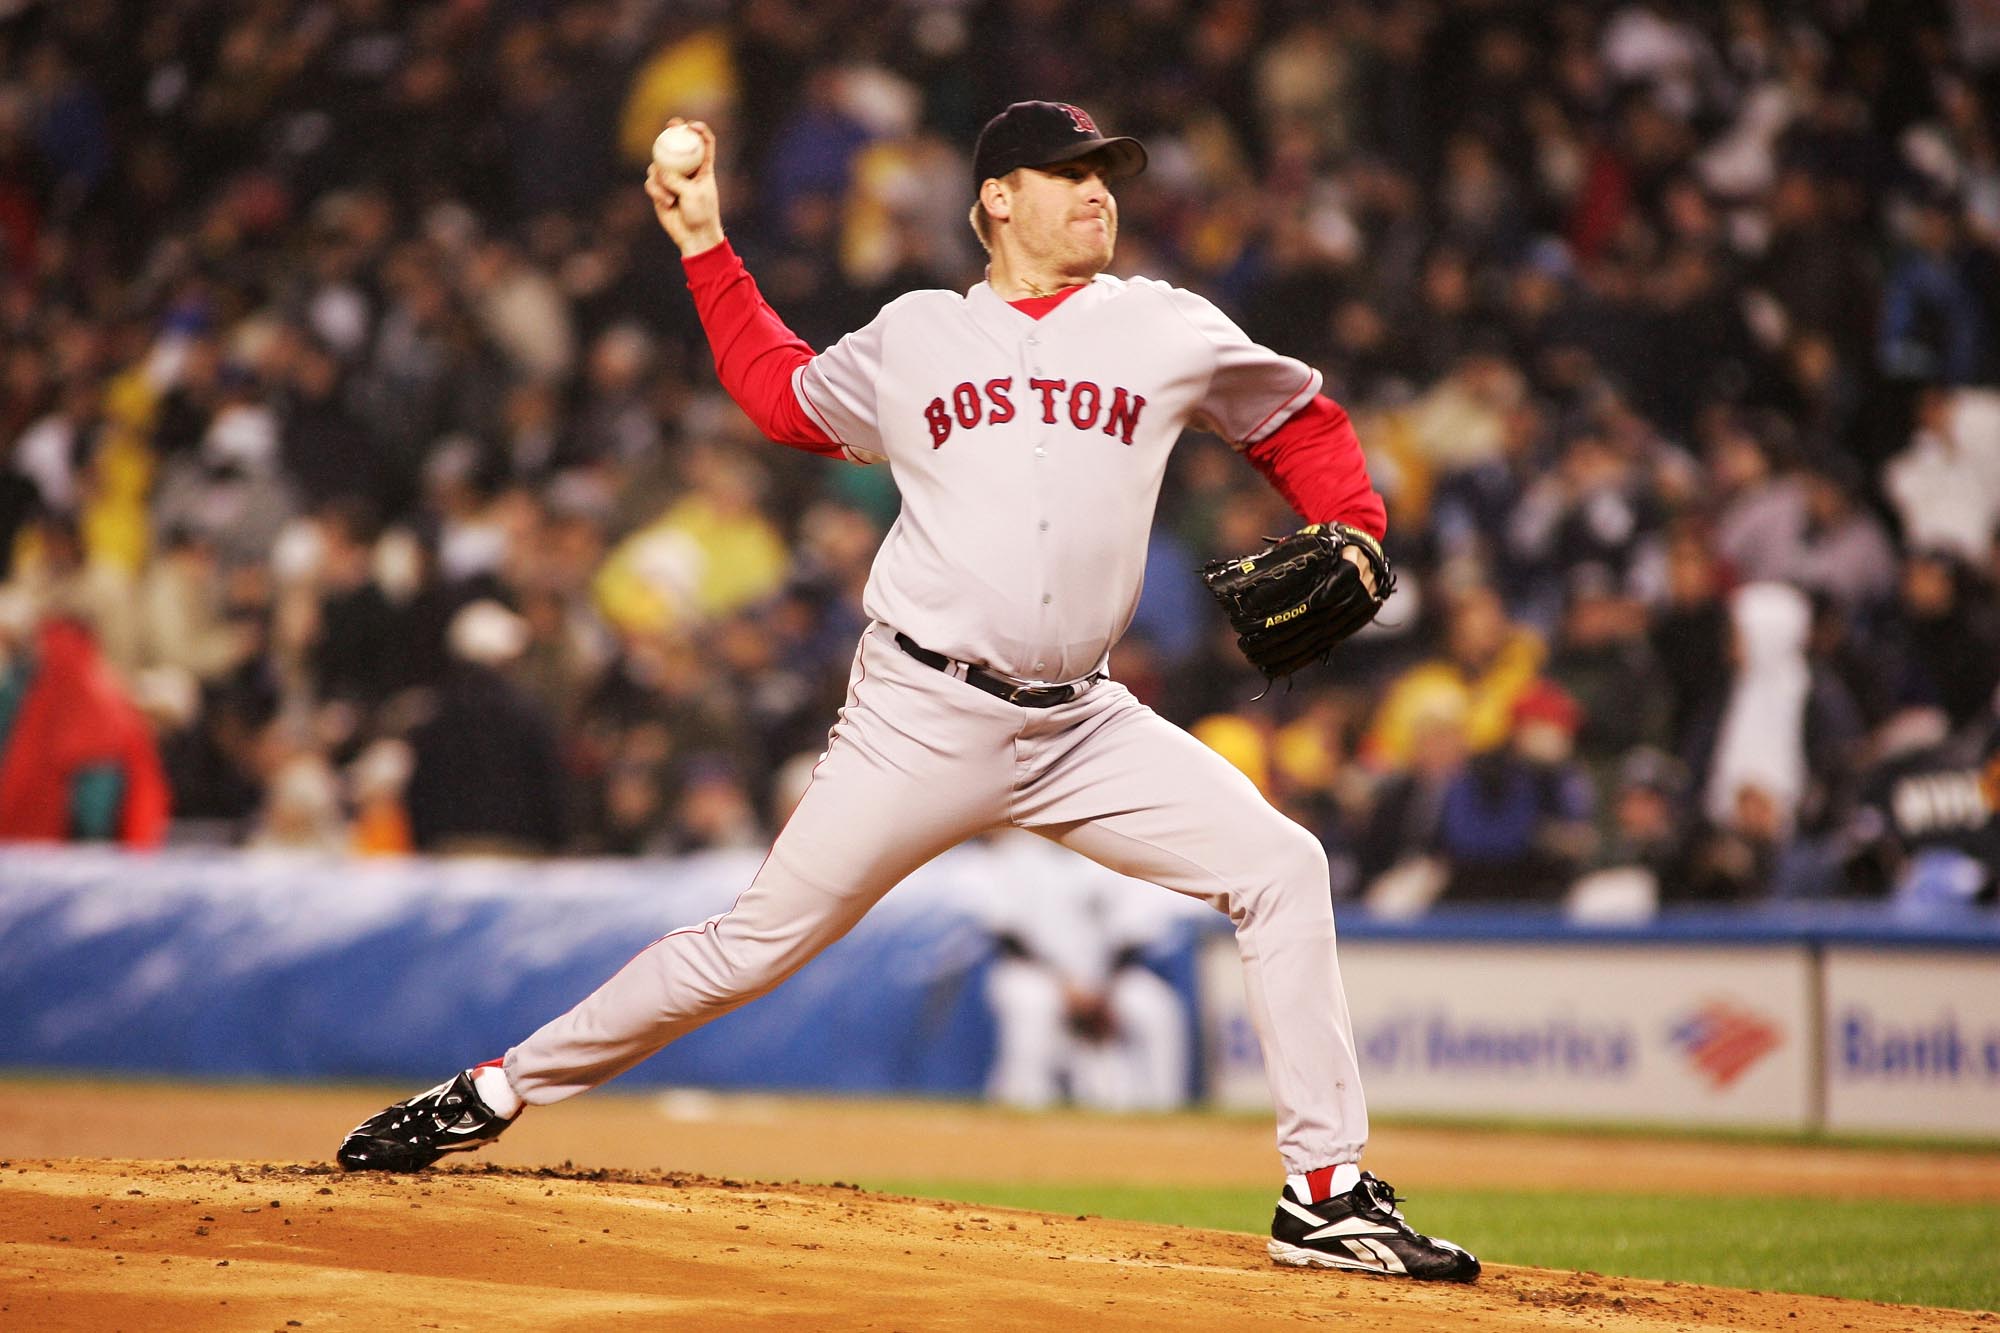 PETTY PARTY: ESPN Edited Curt Schilling Out Of 2004 Red Sox '30